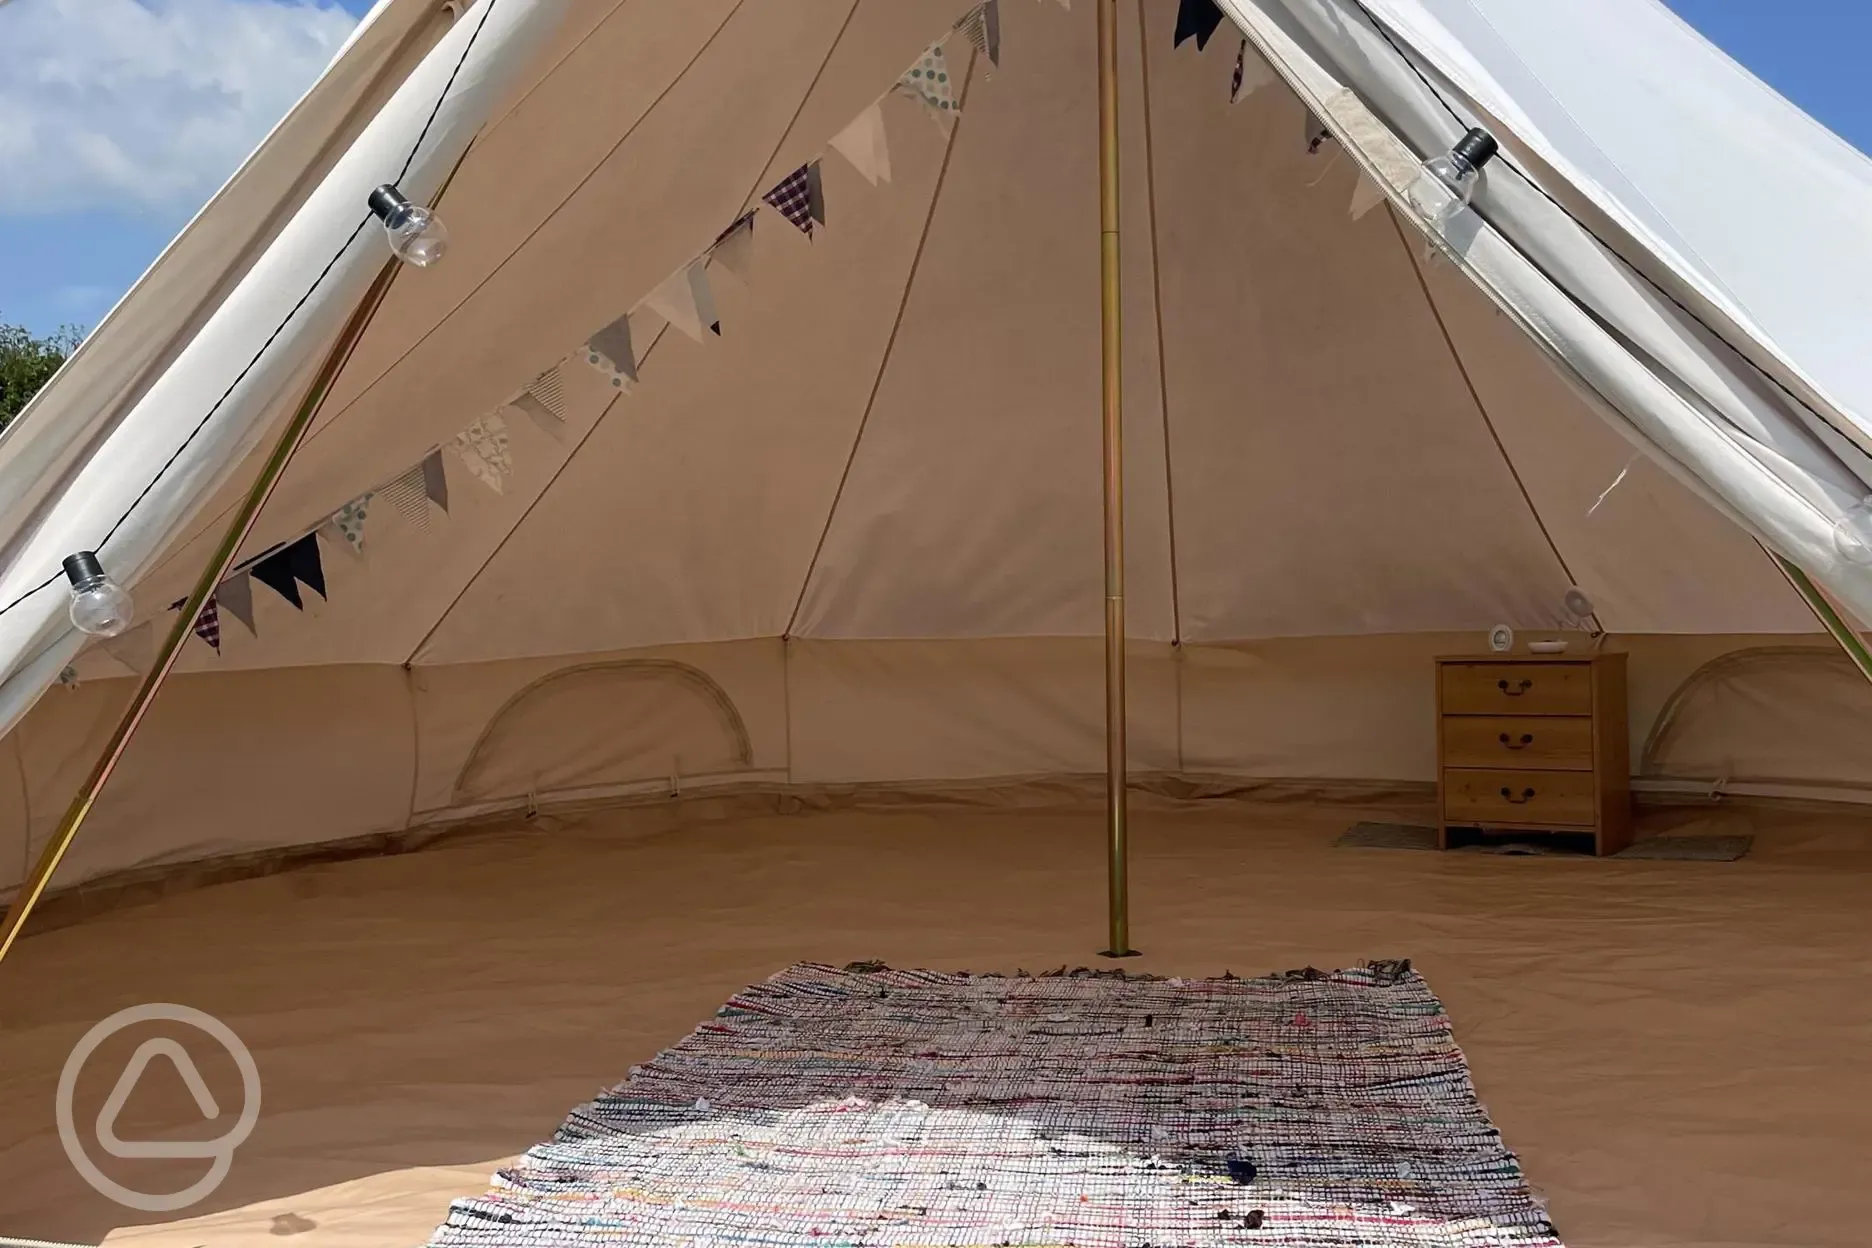 'Bare Bell Tent' just bring your bedding